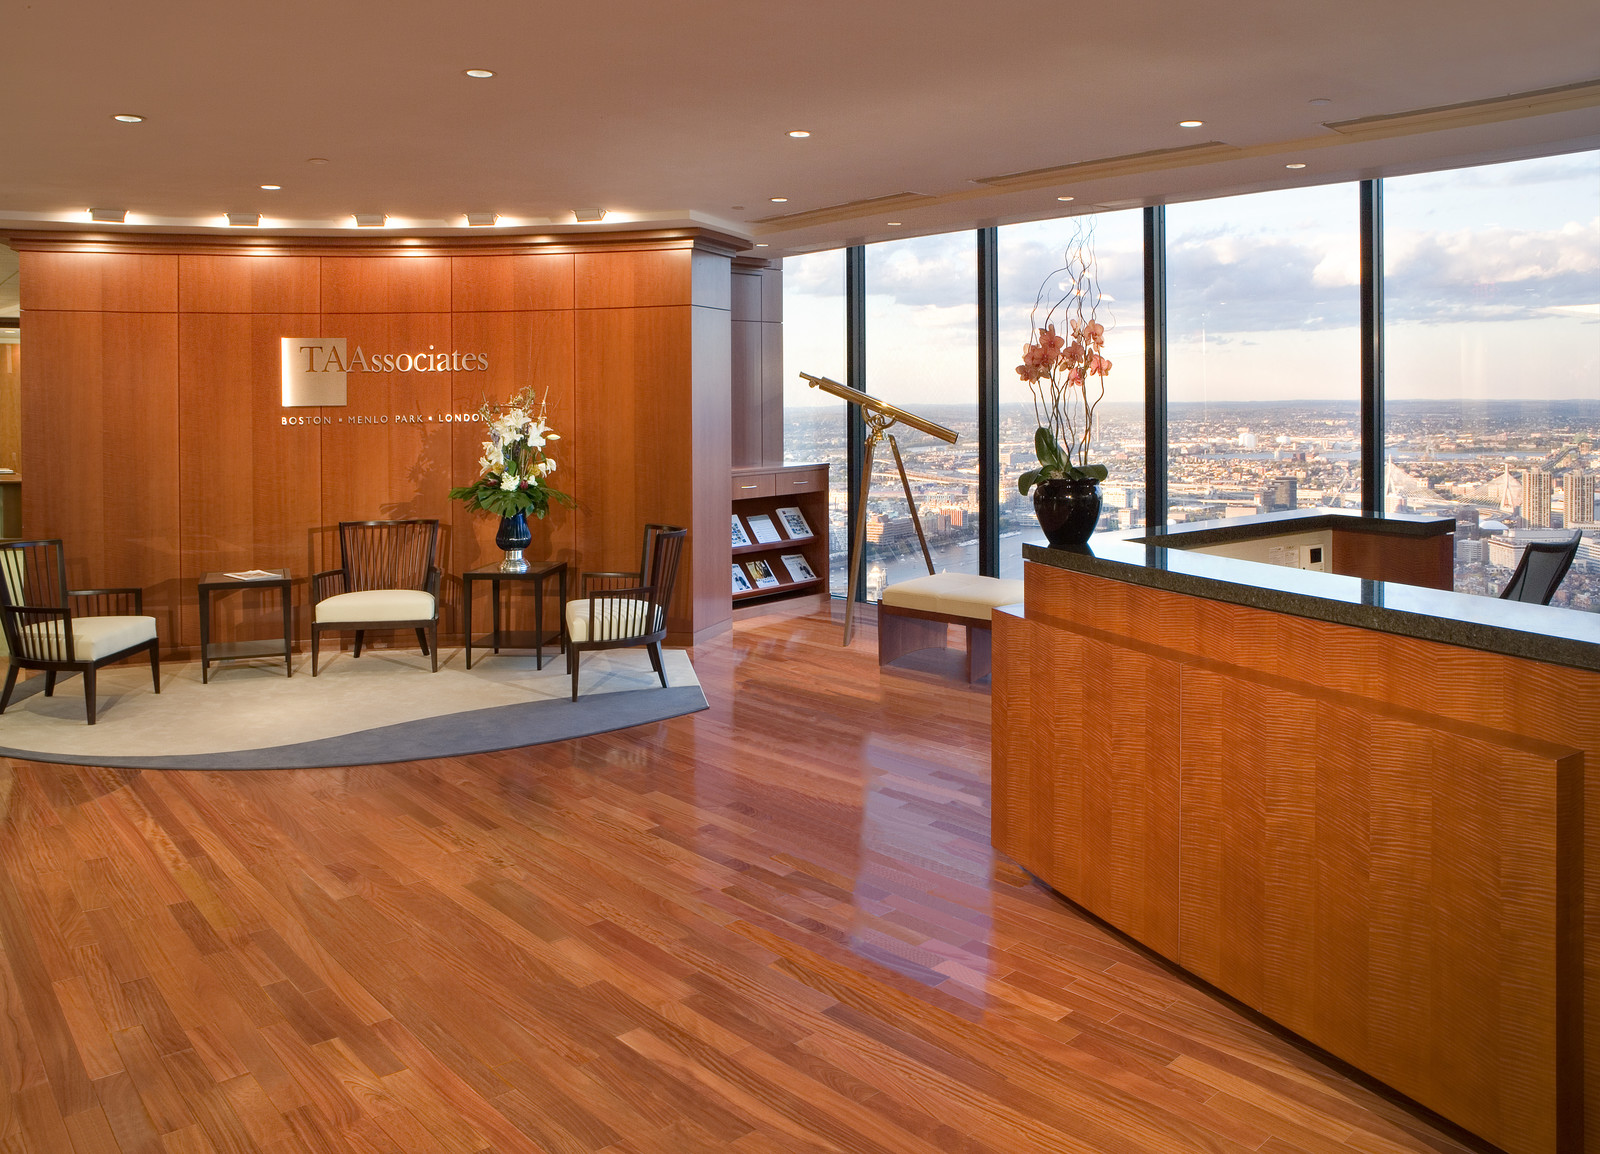 MRW was responsible for the custom wood wall panels and the reception desk in this downtown Boston office sace. The space feels warm and inviting when you walk through the doors. 